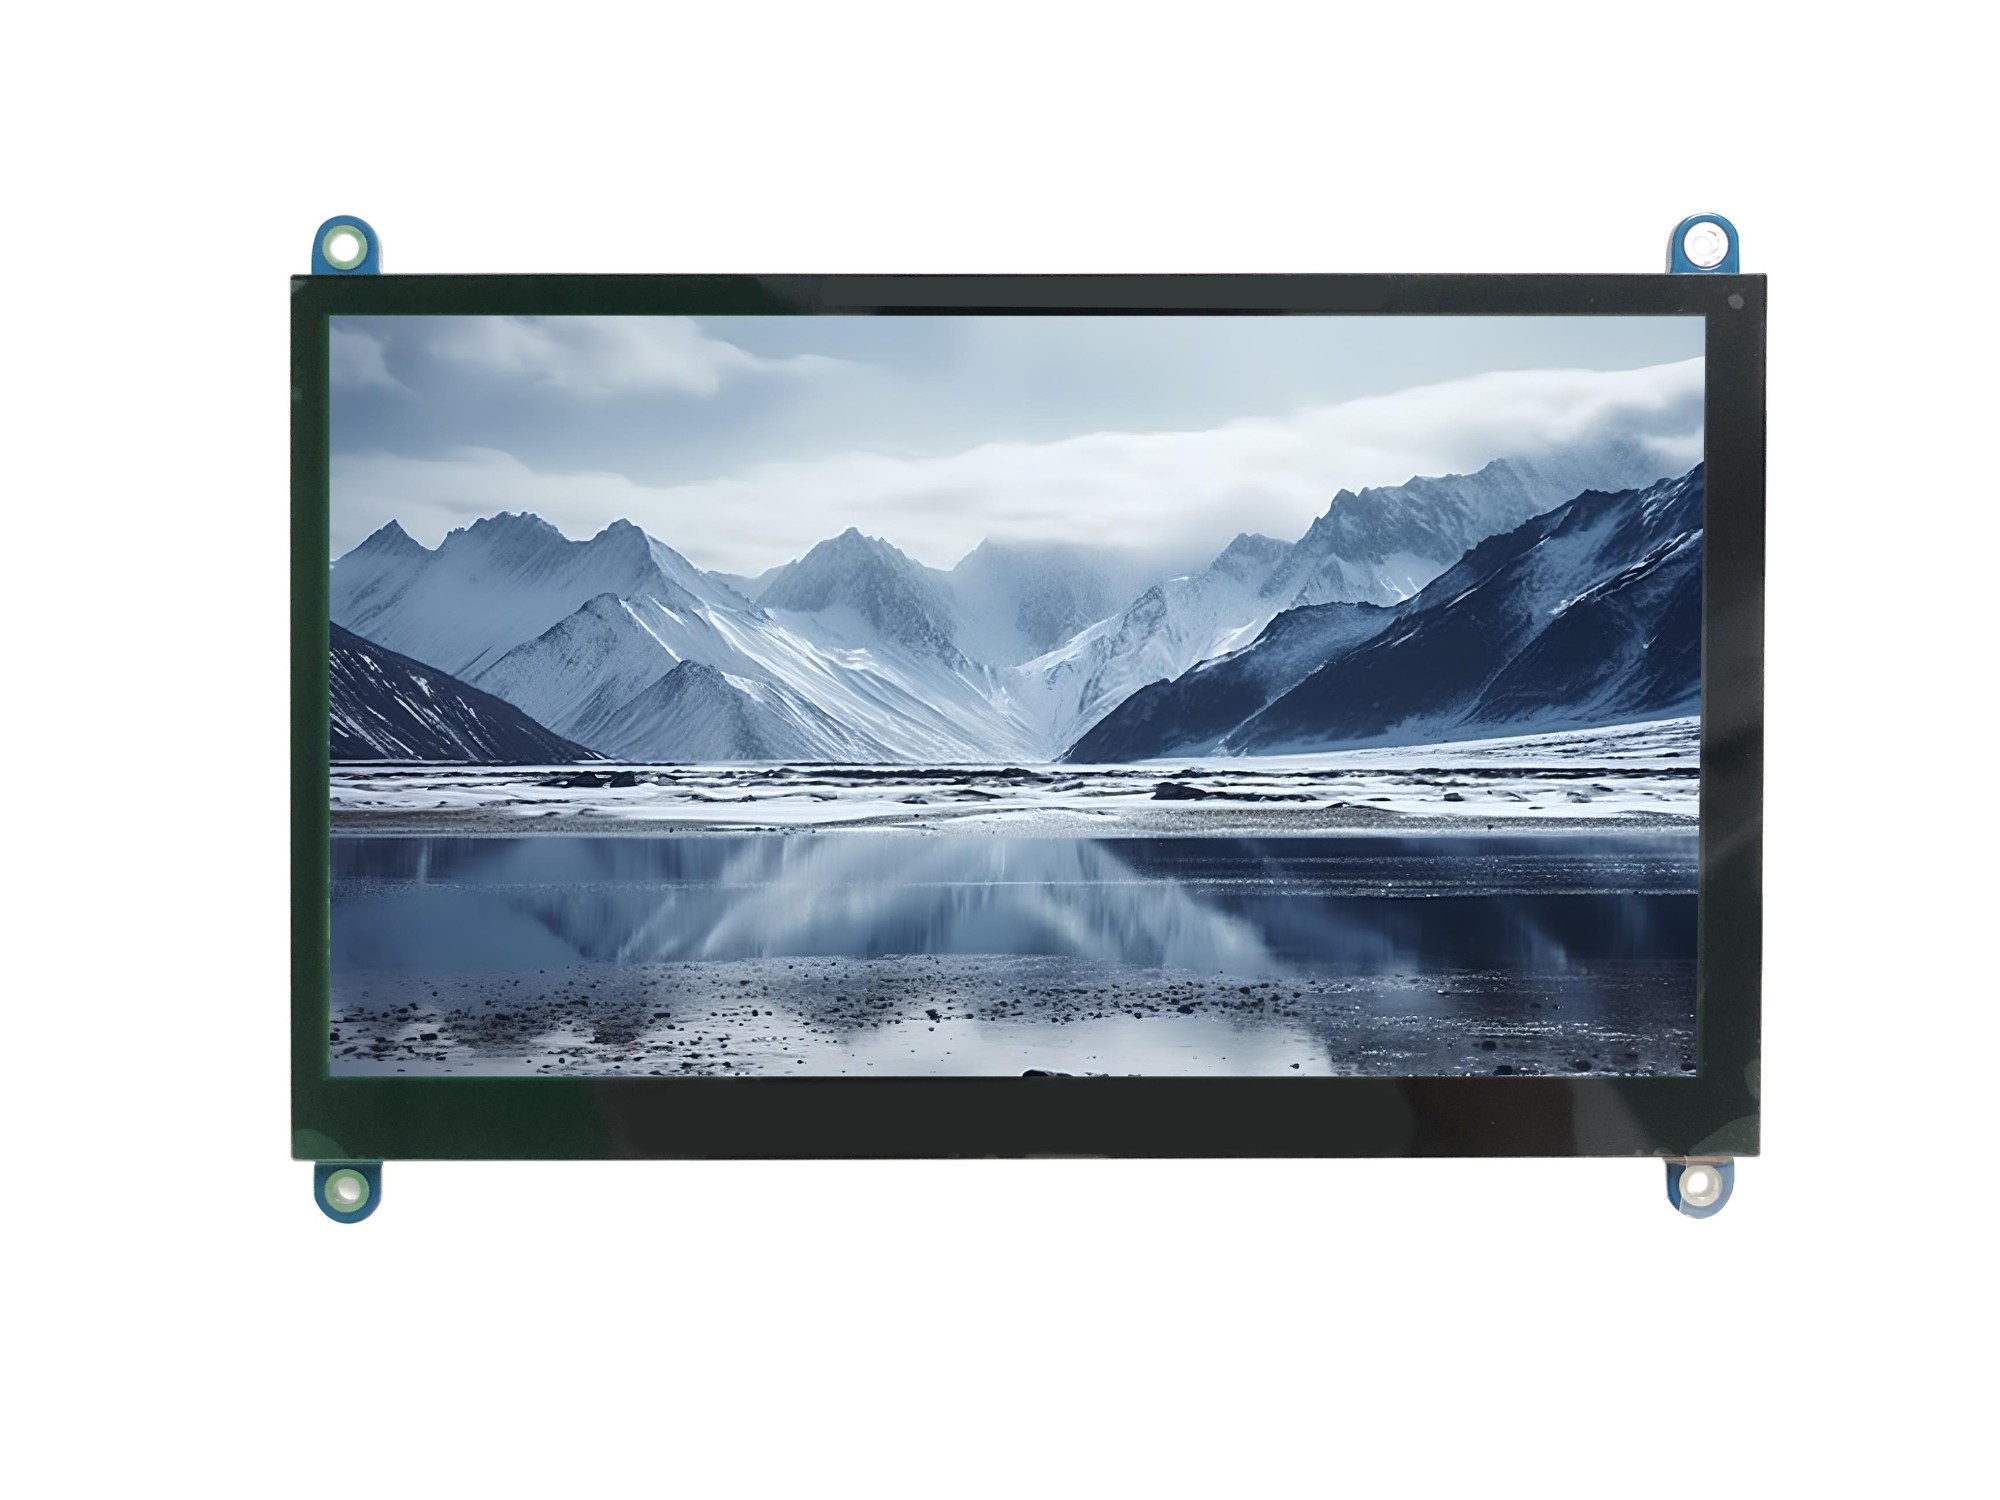 7inch standard display with HDMI input-800*480